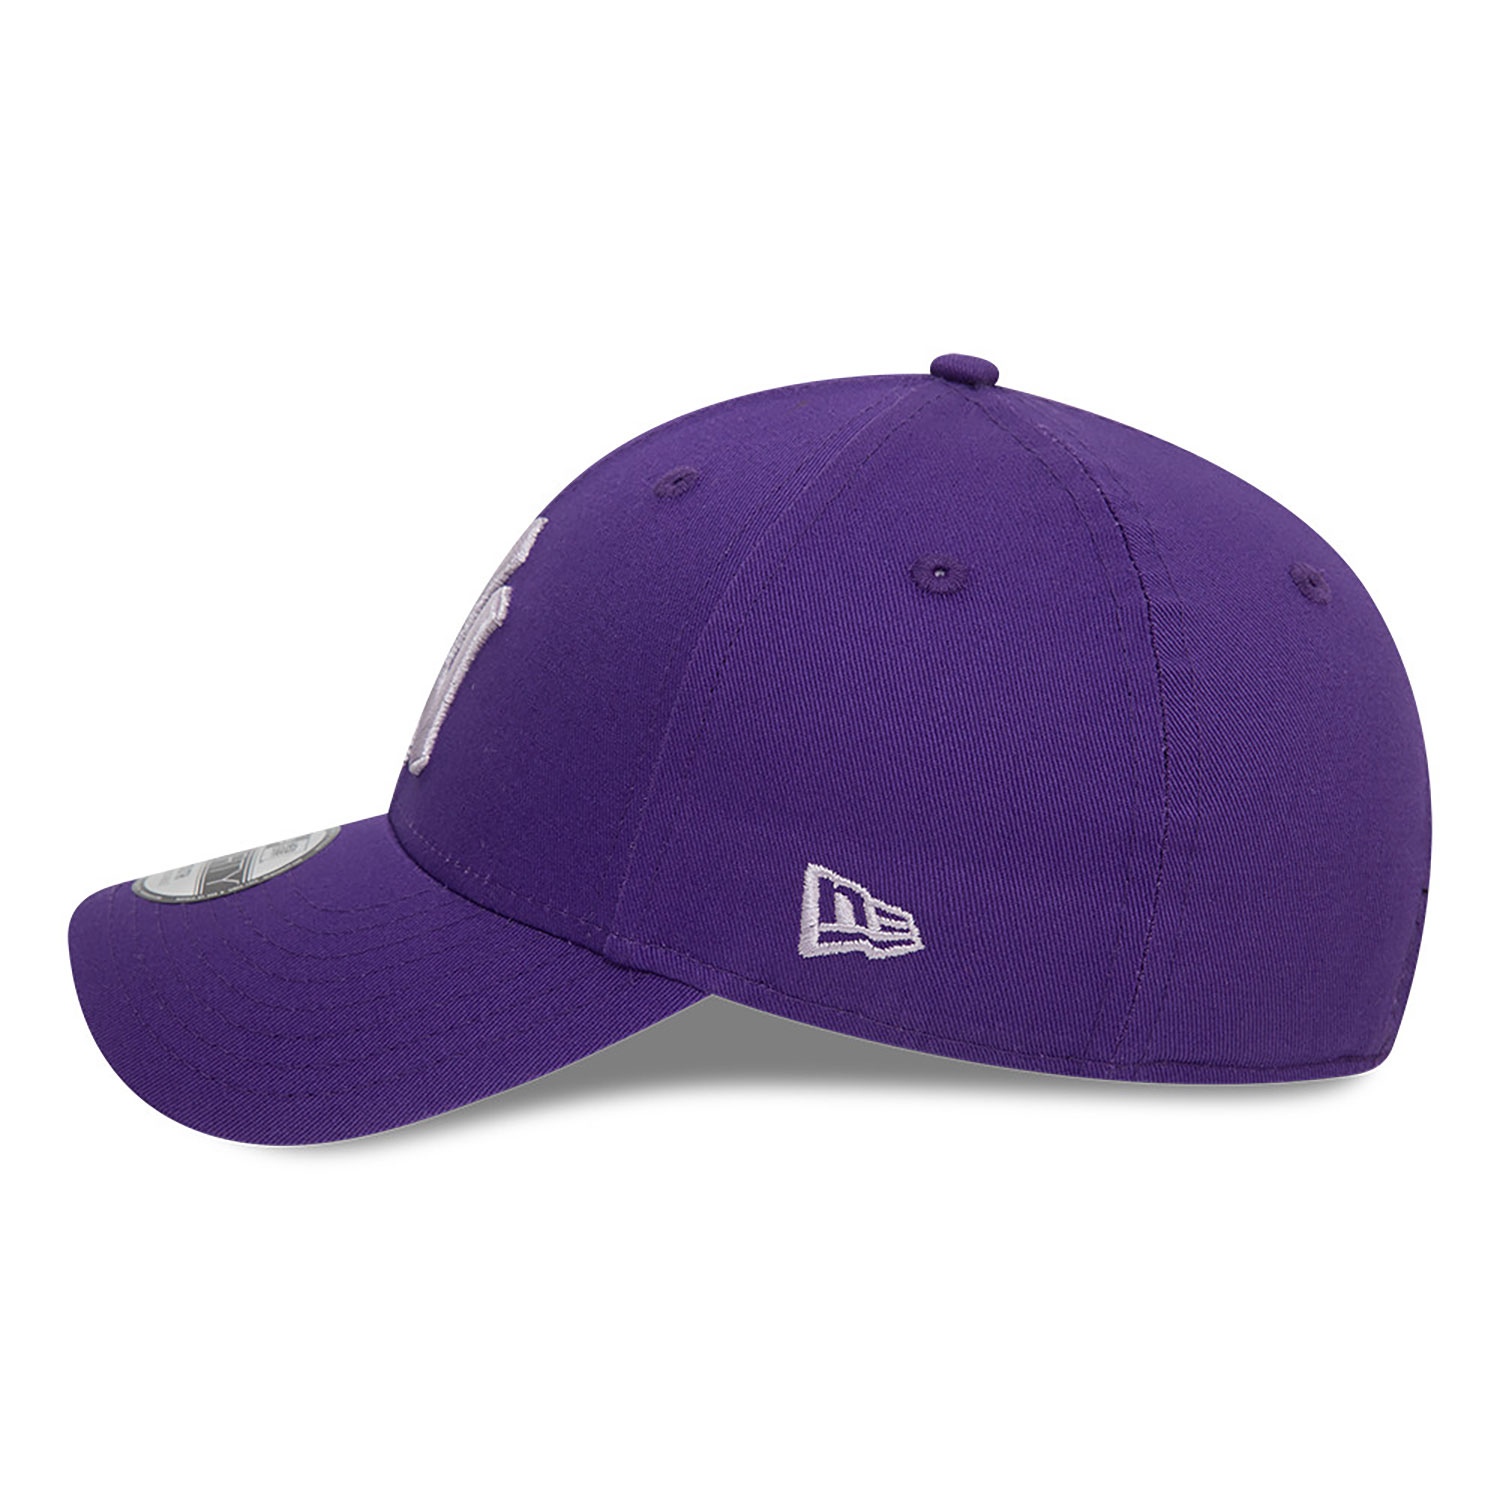 New York Yankees Youth Purple Icon Purple 9FORTY Adjustable Cap